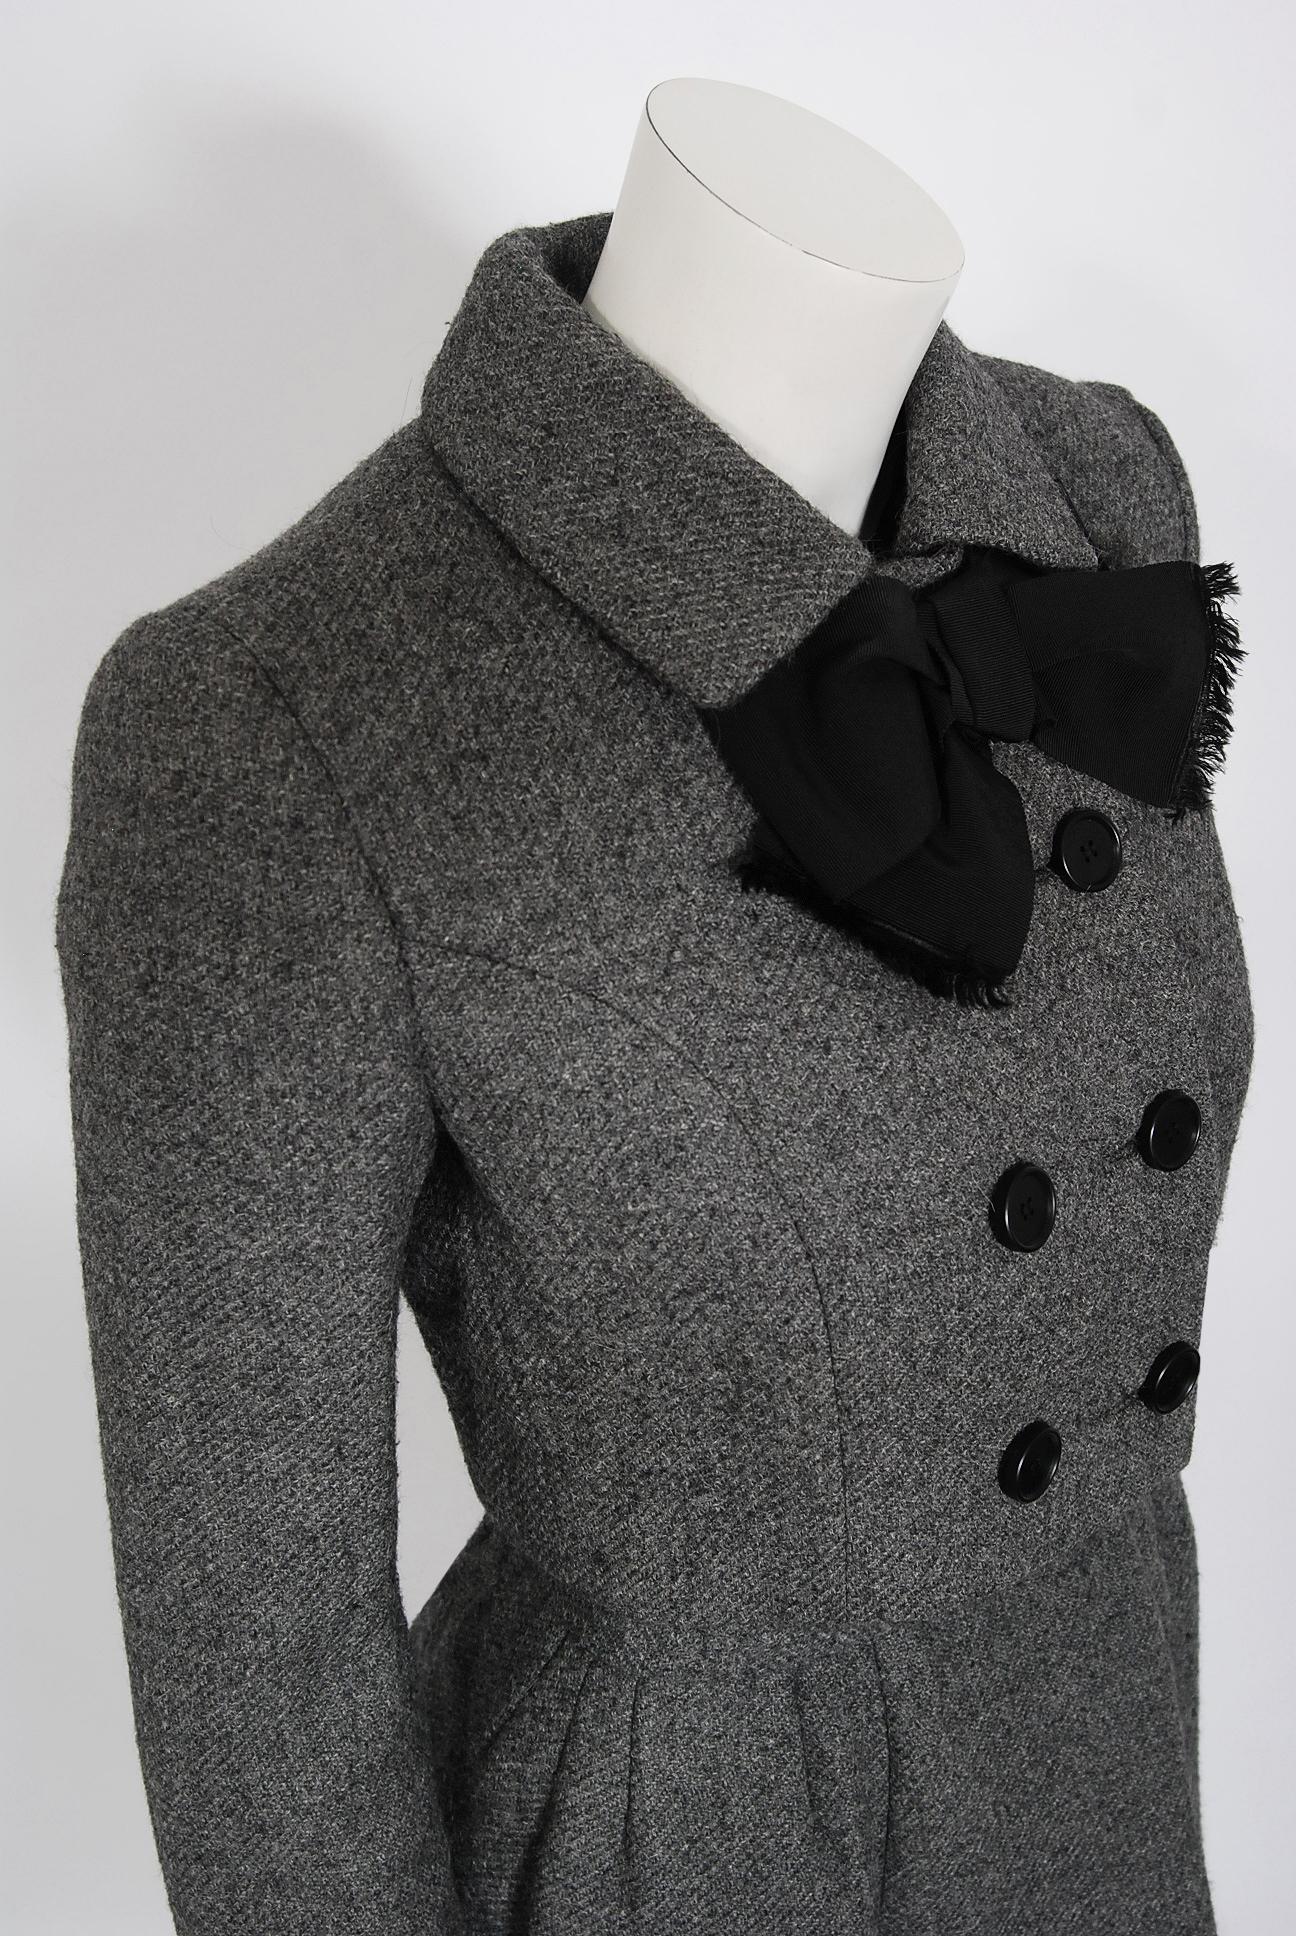 Women's Vintage 1964 Norman Norell Documented Gray Wool Dress w/ Double-Breasted Jacket